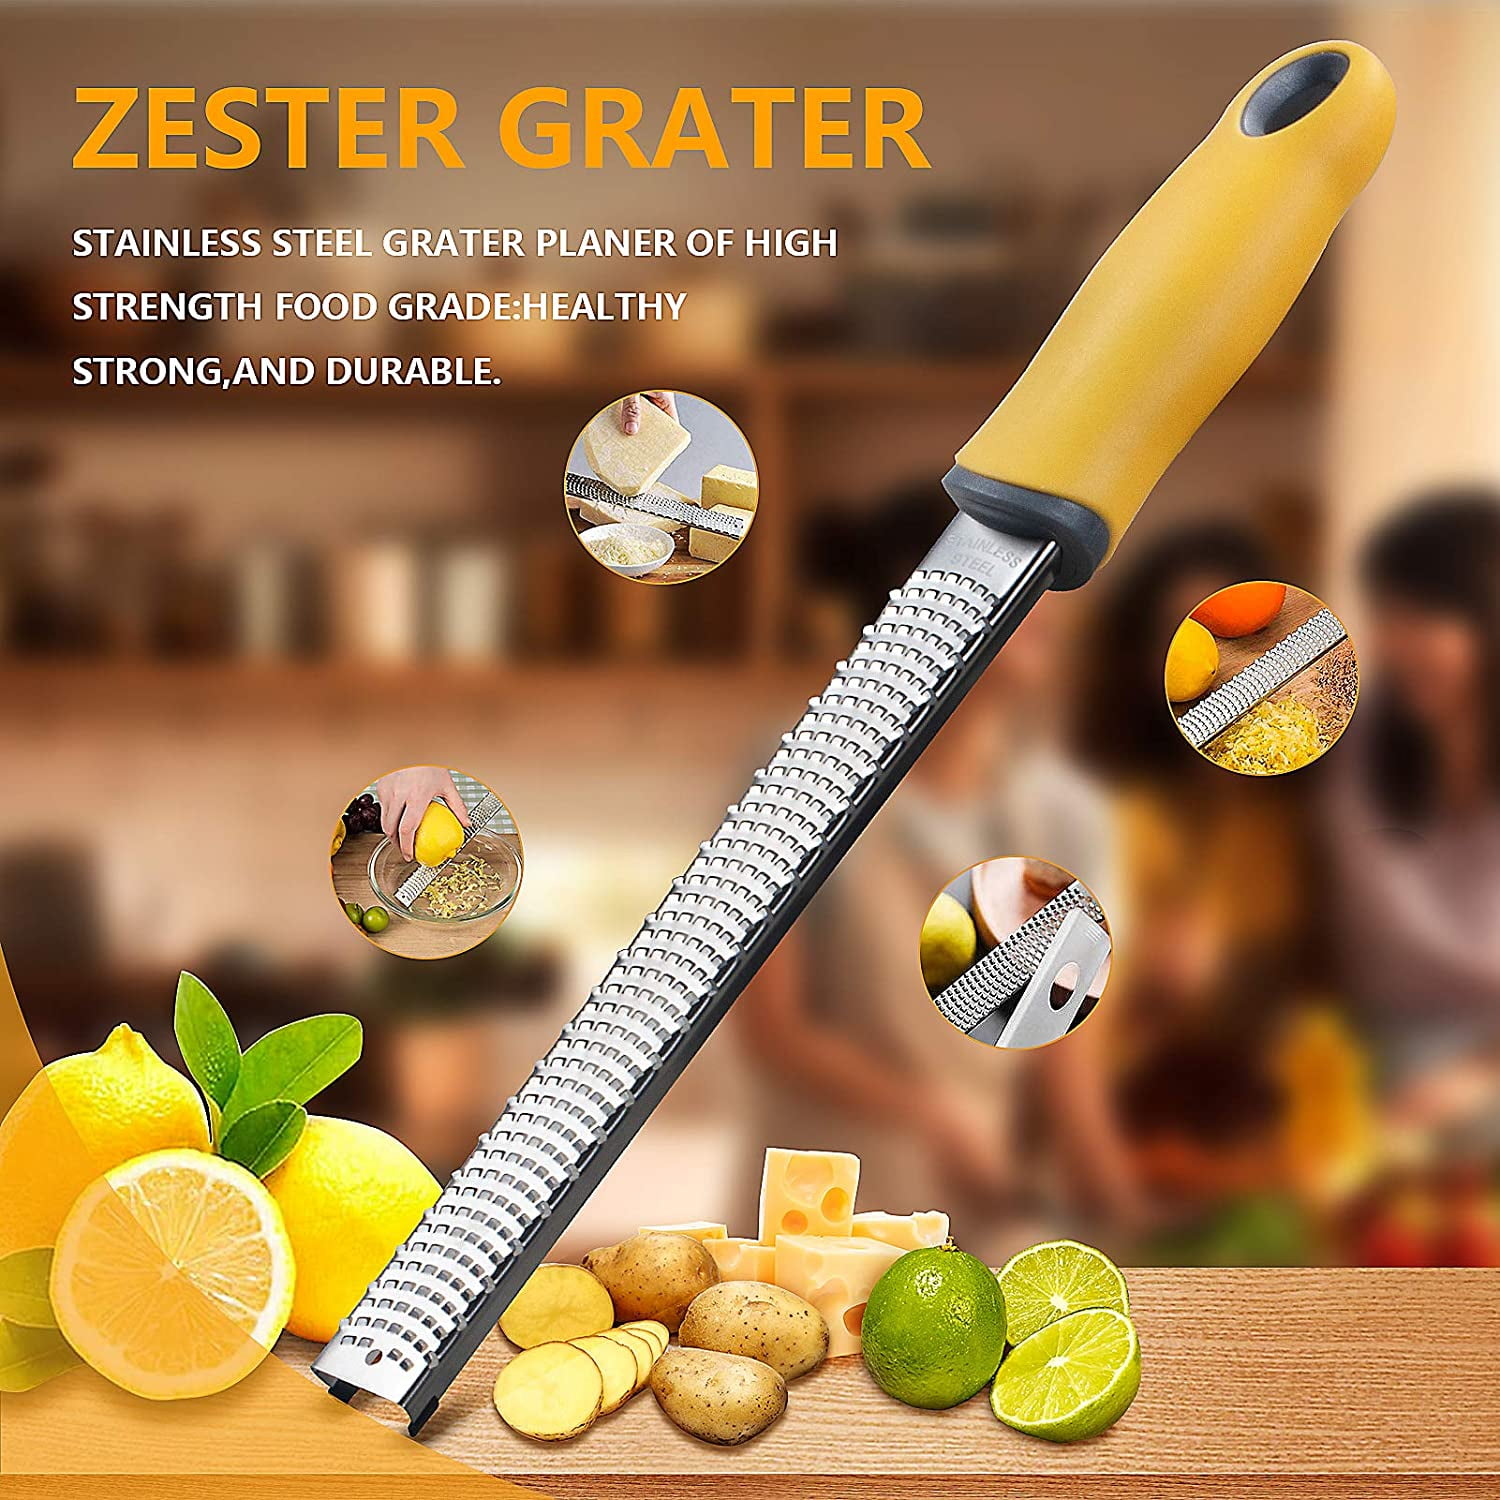 Chocolate Nutmeg Silicone Lemon Protective Cover-Dishwasher Safe Vegetables Fruits-Stainless Steel Blade Garlic Ginger SHU UFANRO zeater-1.5 Citrus Zester & Cheese Grater —Cheese 